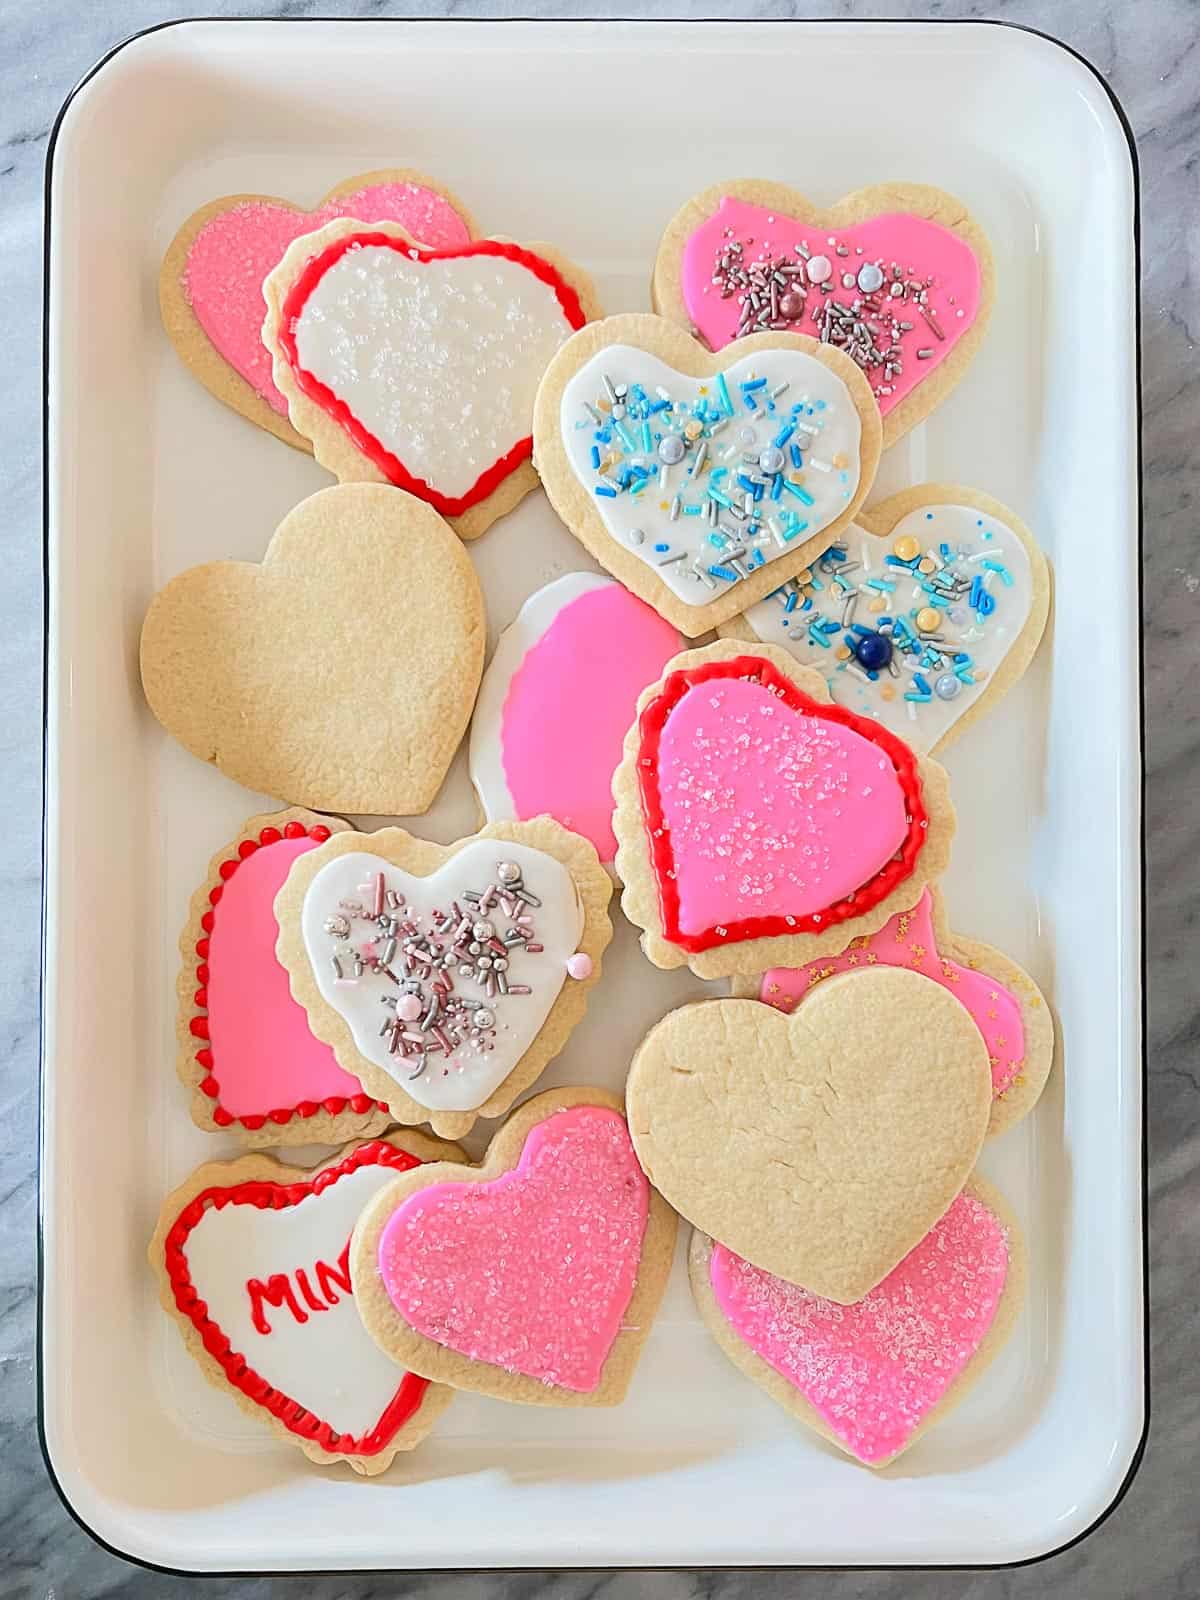 heart shaped cut out sugar cookies with royal icing